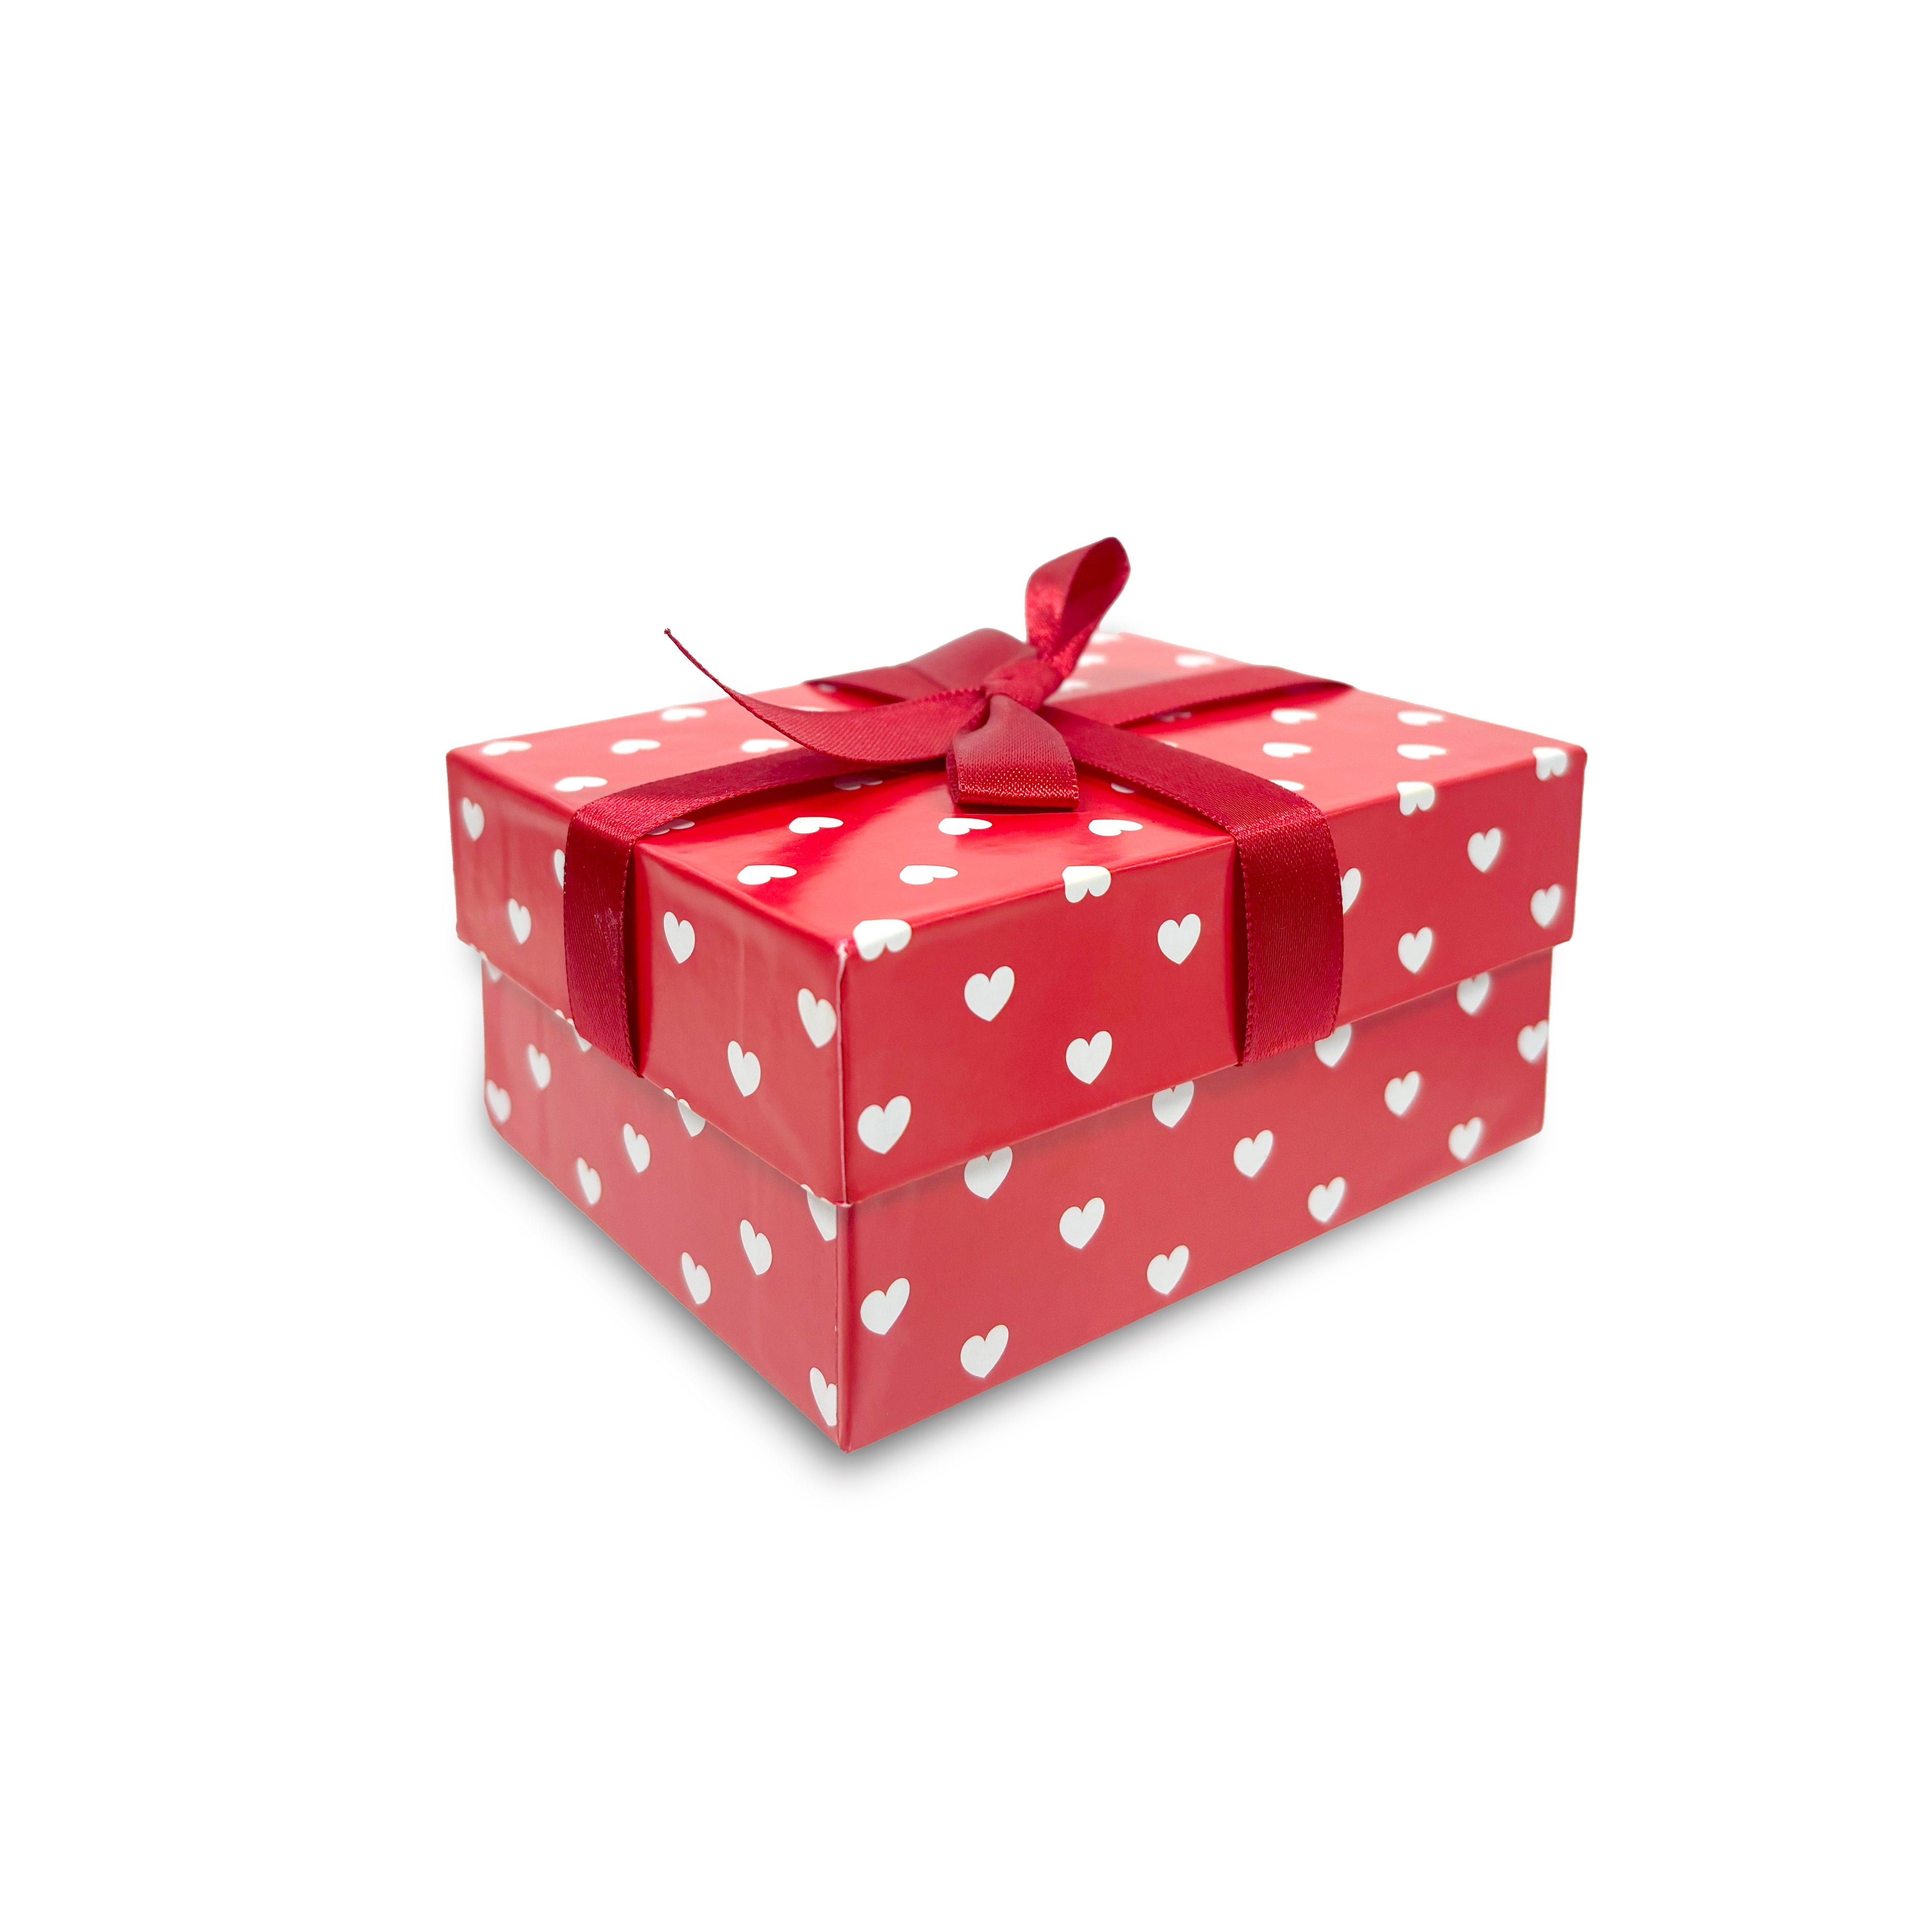 Gift Box Loving Hearts Red and white L10.5 x W8 x D5.4cm 1pc